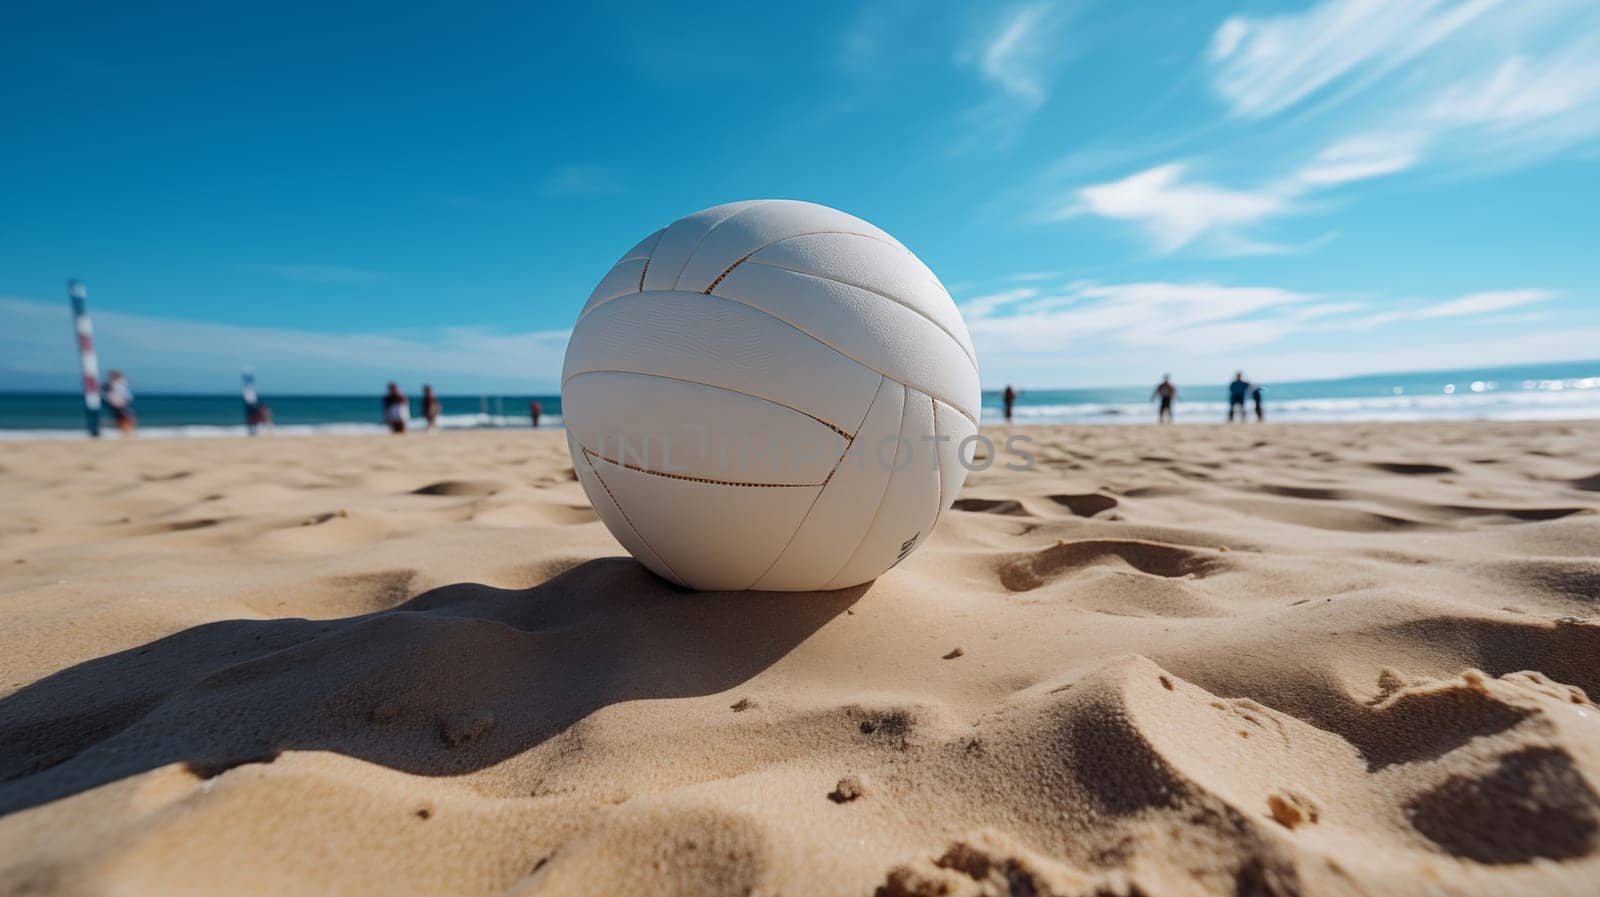 A white volleyball lies on a sandy beach with waves and beachgoers in the blurred background, under a blue sky.